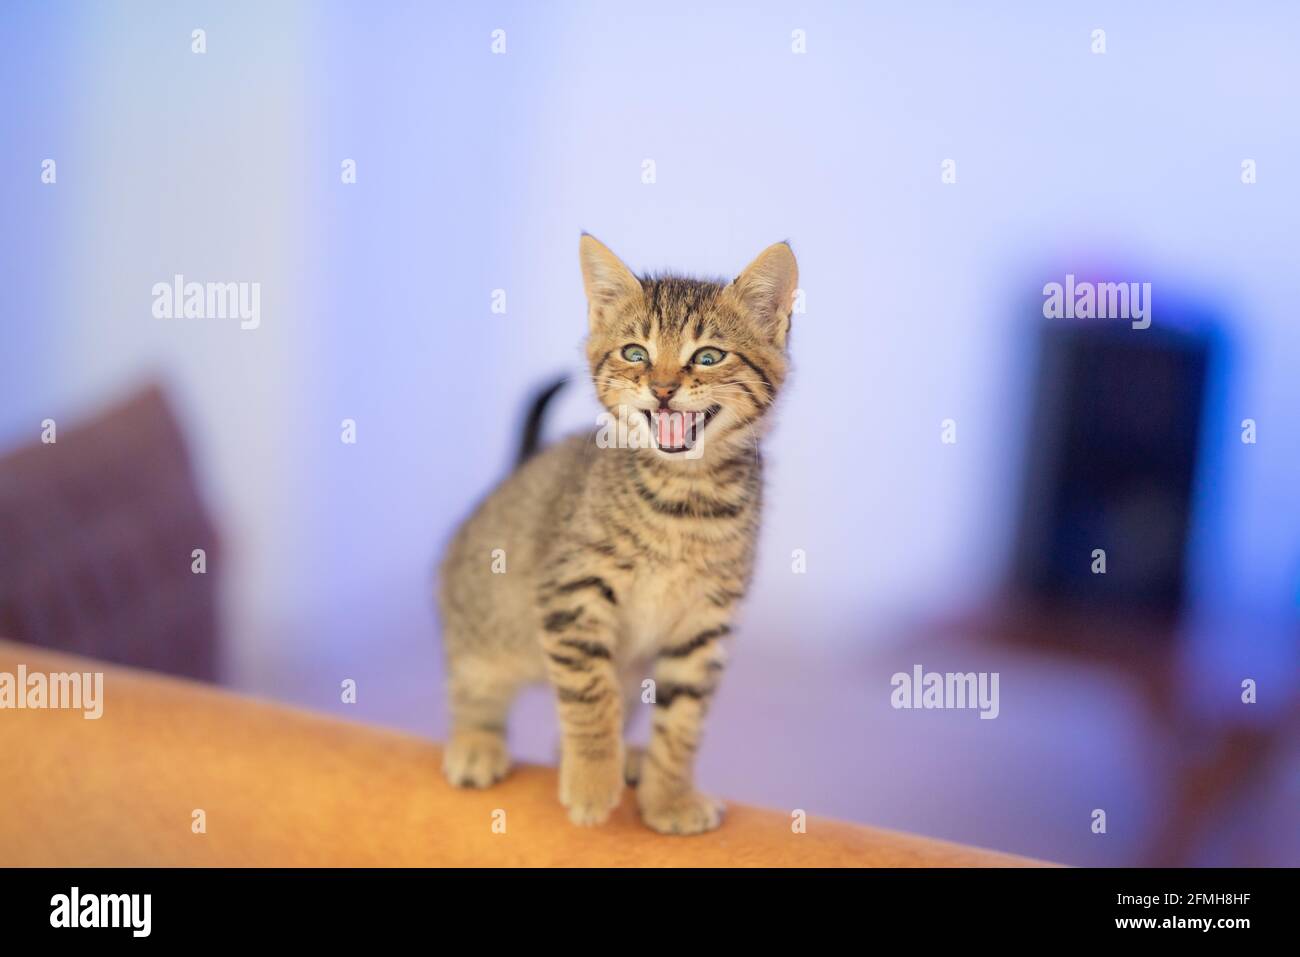 Tabby kitten meowing looking at the camera Stock Photo